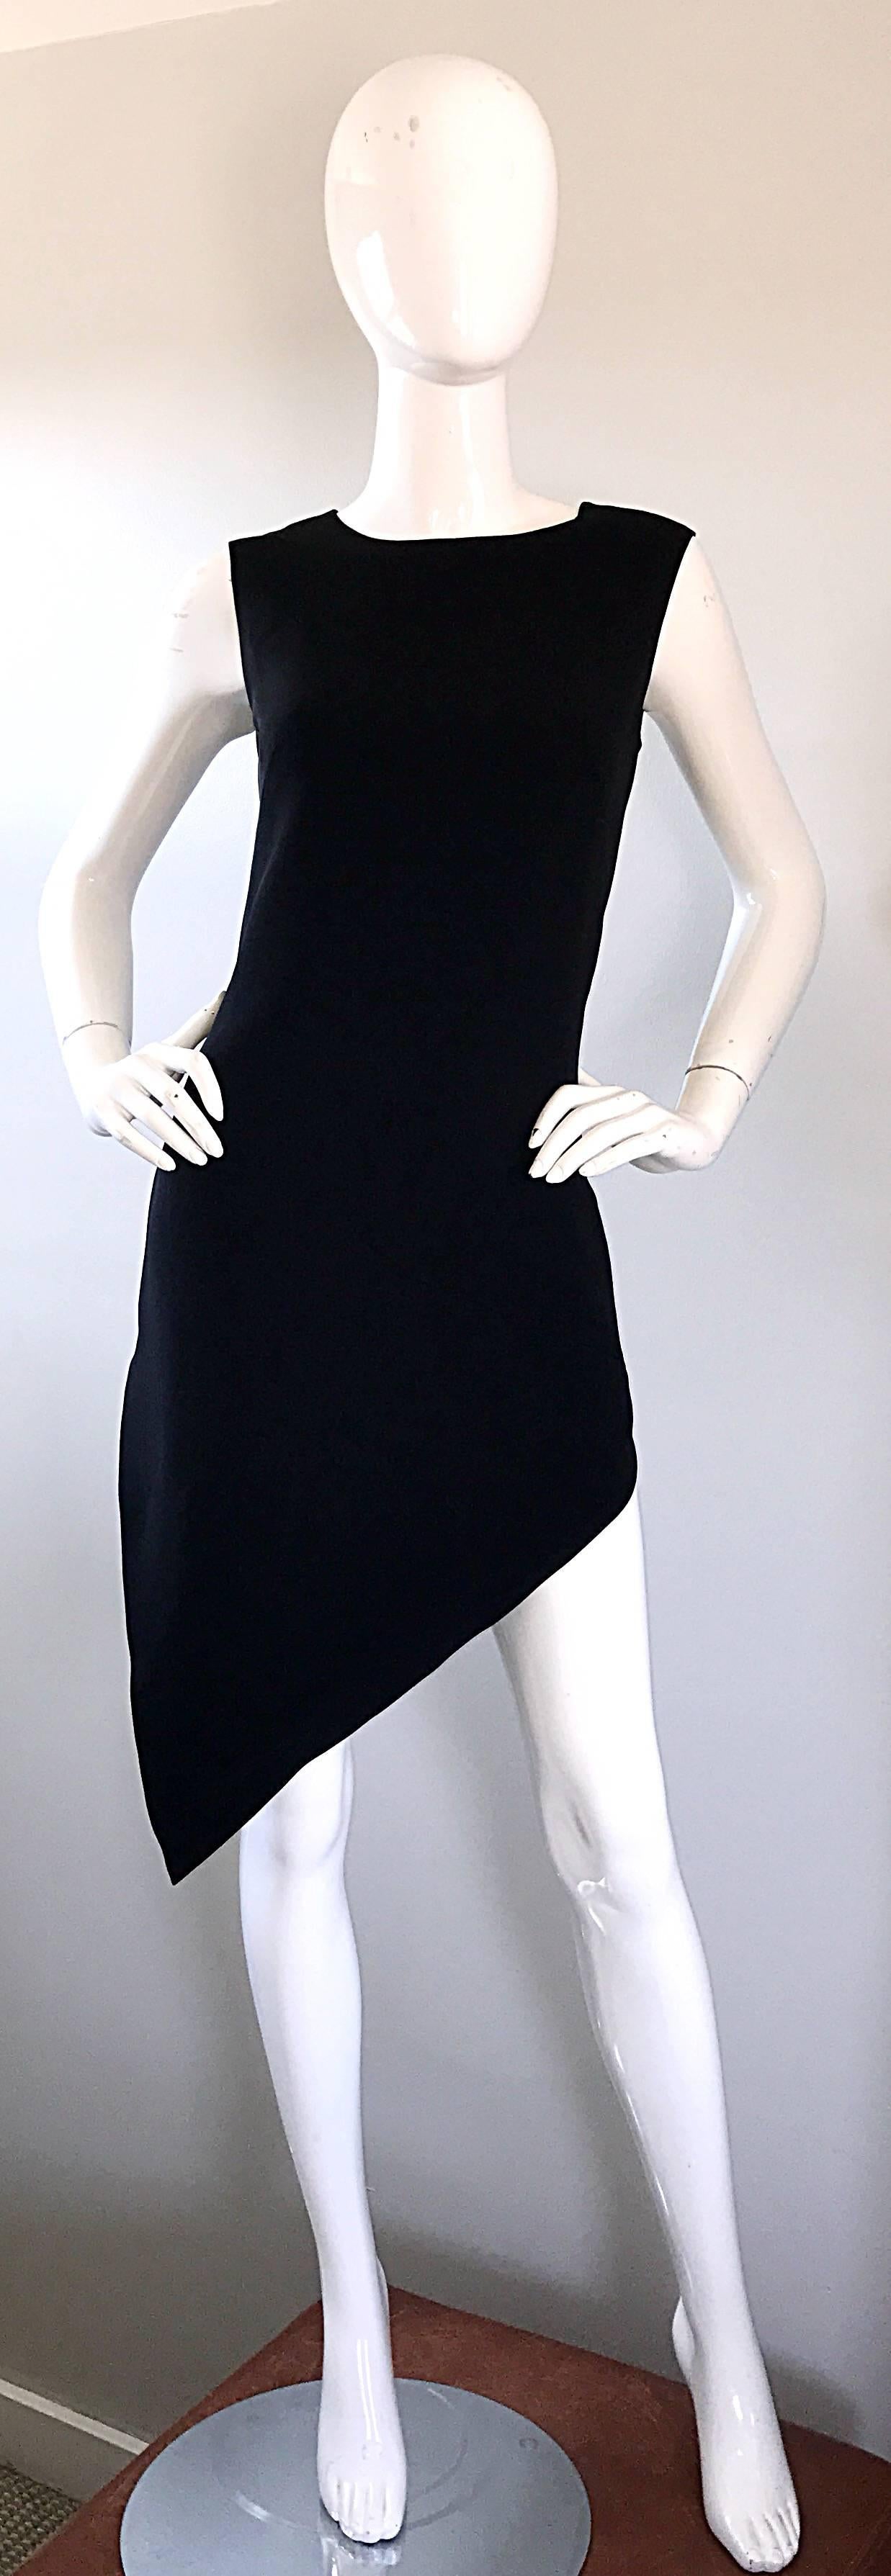 1990s Moschino Cheap & Chic Black Asymmetrical Hi Lo Vintage 90s Dress LBD  In Excellent Condition For Sale In San Diego, CA